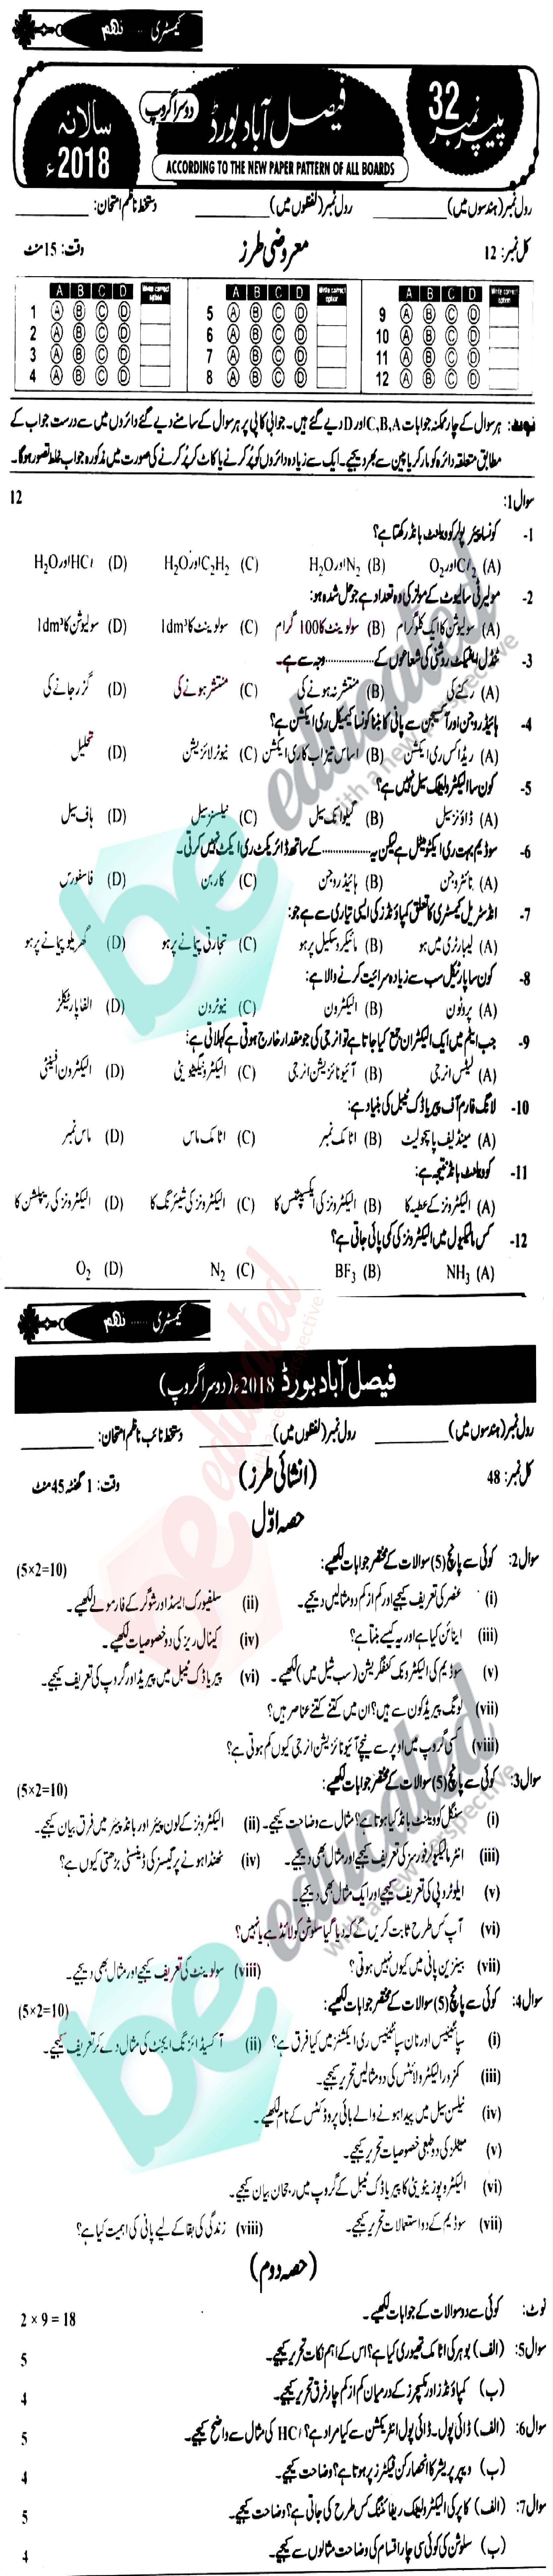 Chemistry 9th class Past Paper Group 2 BISE Faisalabad 2018